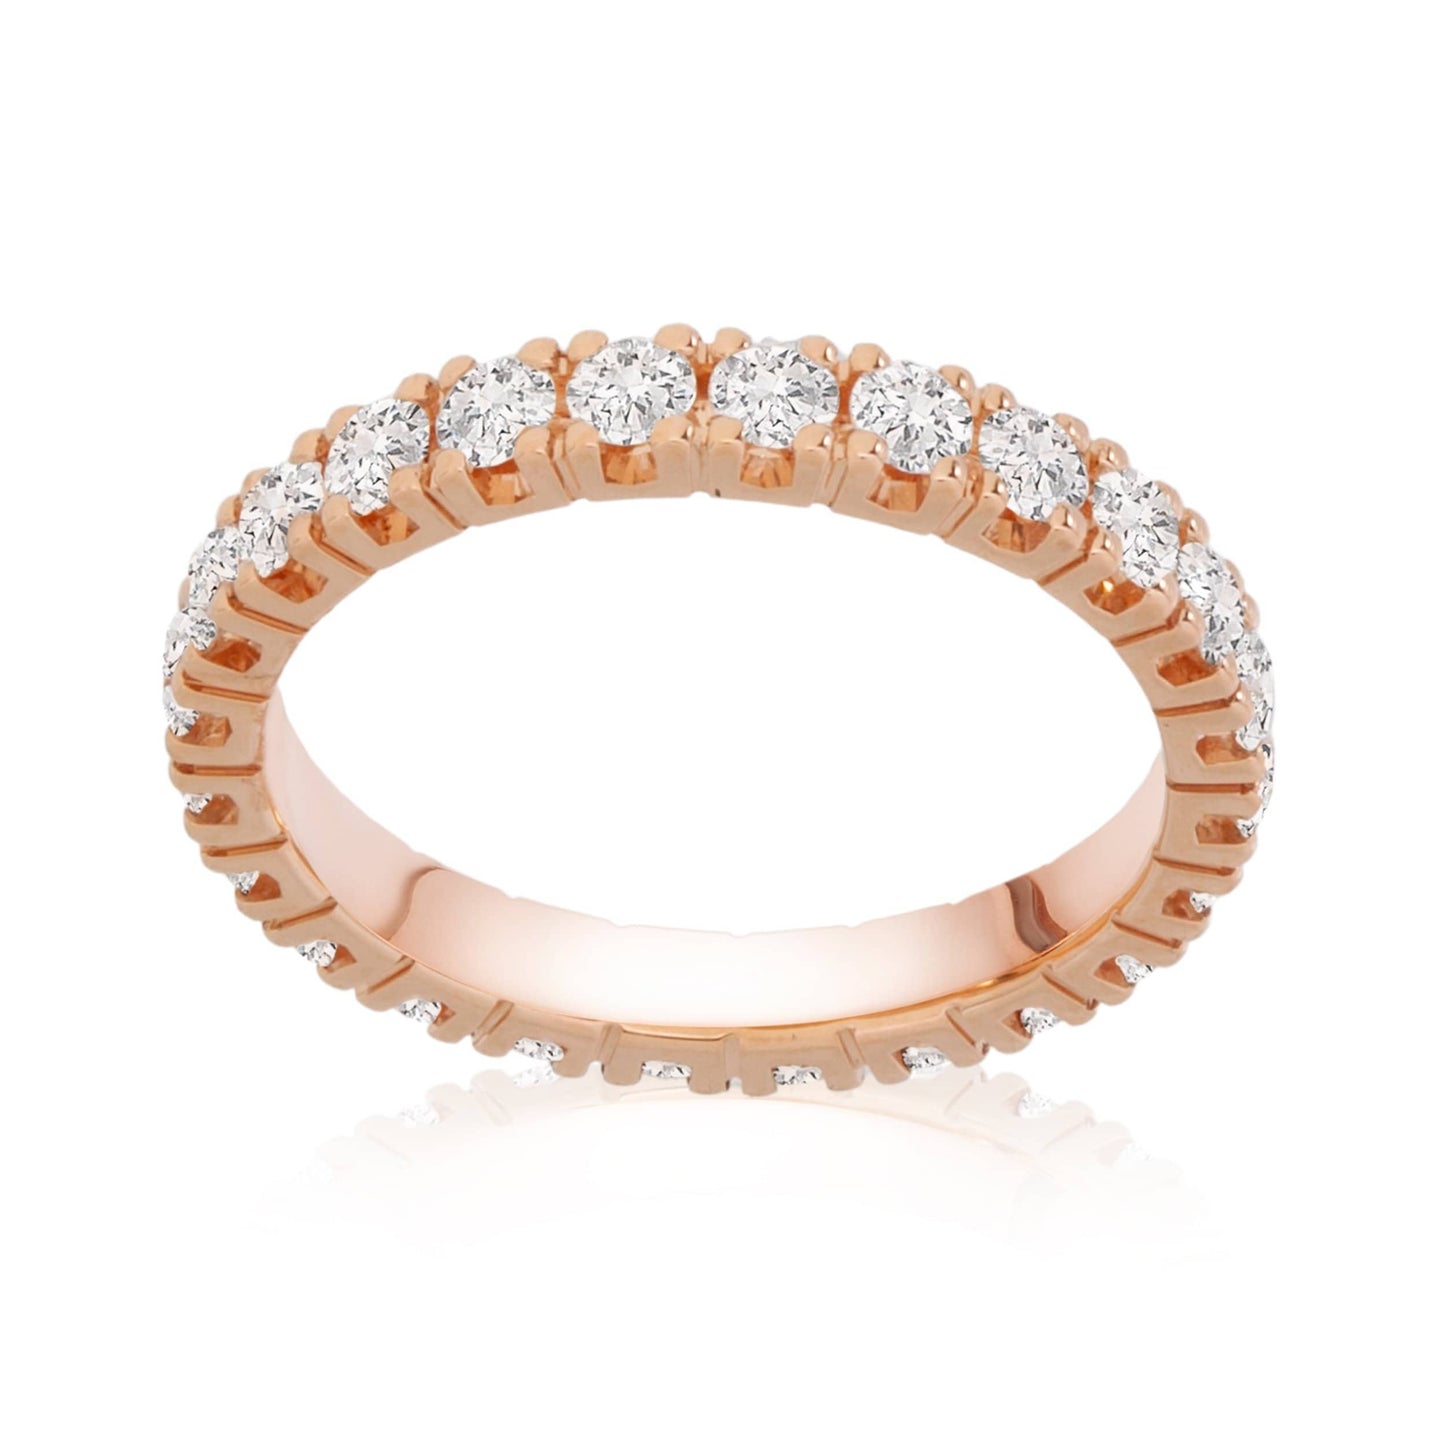 Dalia T Online Ring Bridal Collection 18KT RG 1.52CT Eternity Ring